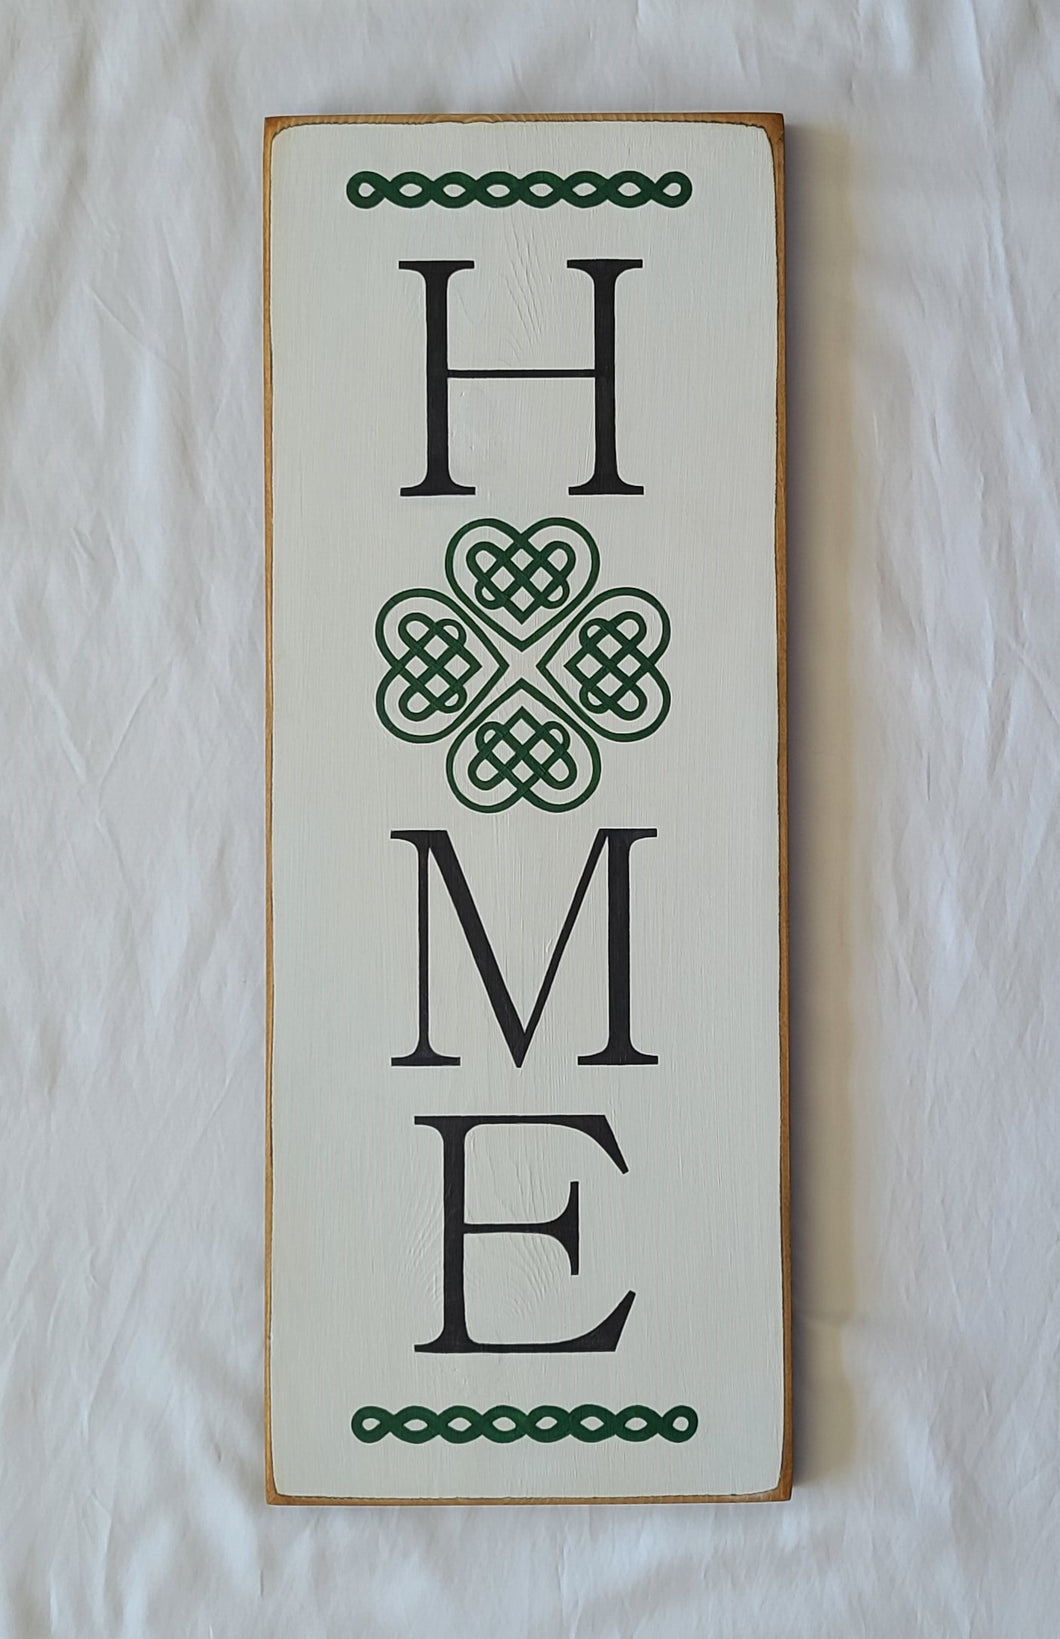 Home Vertical Wood Sign with Irish Knot for the O in Home Irish Wooden Sign